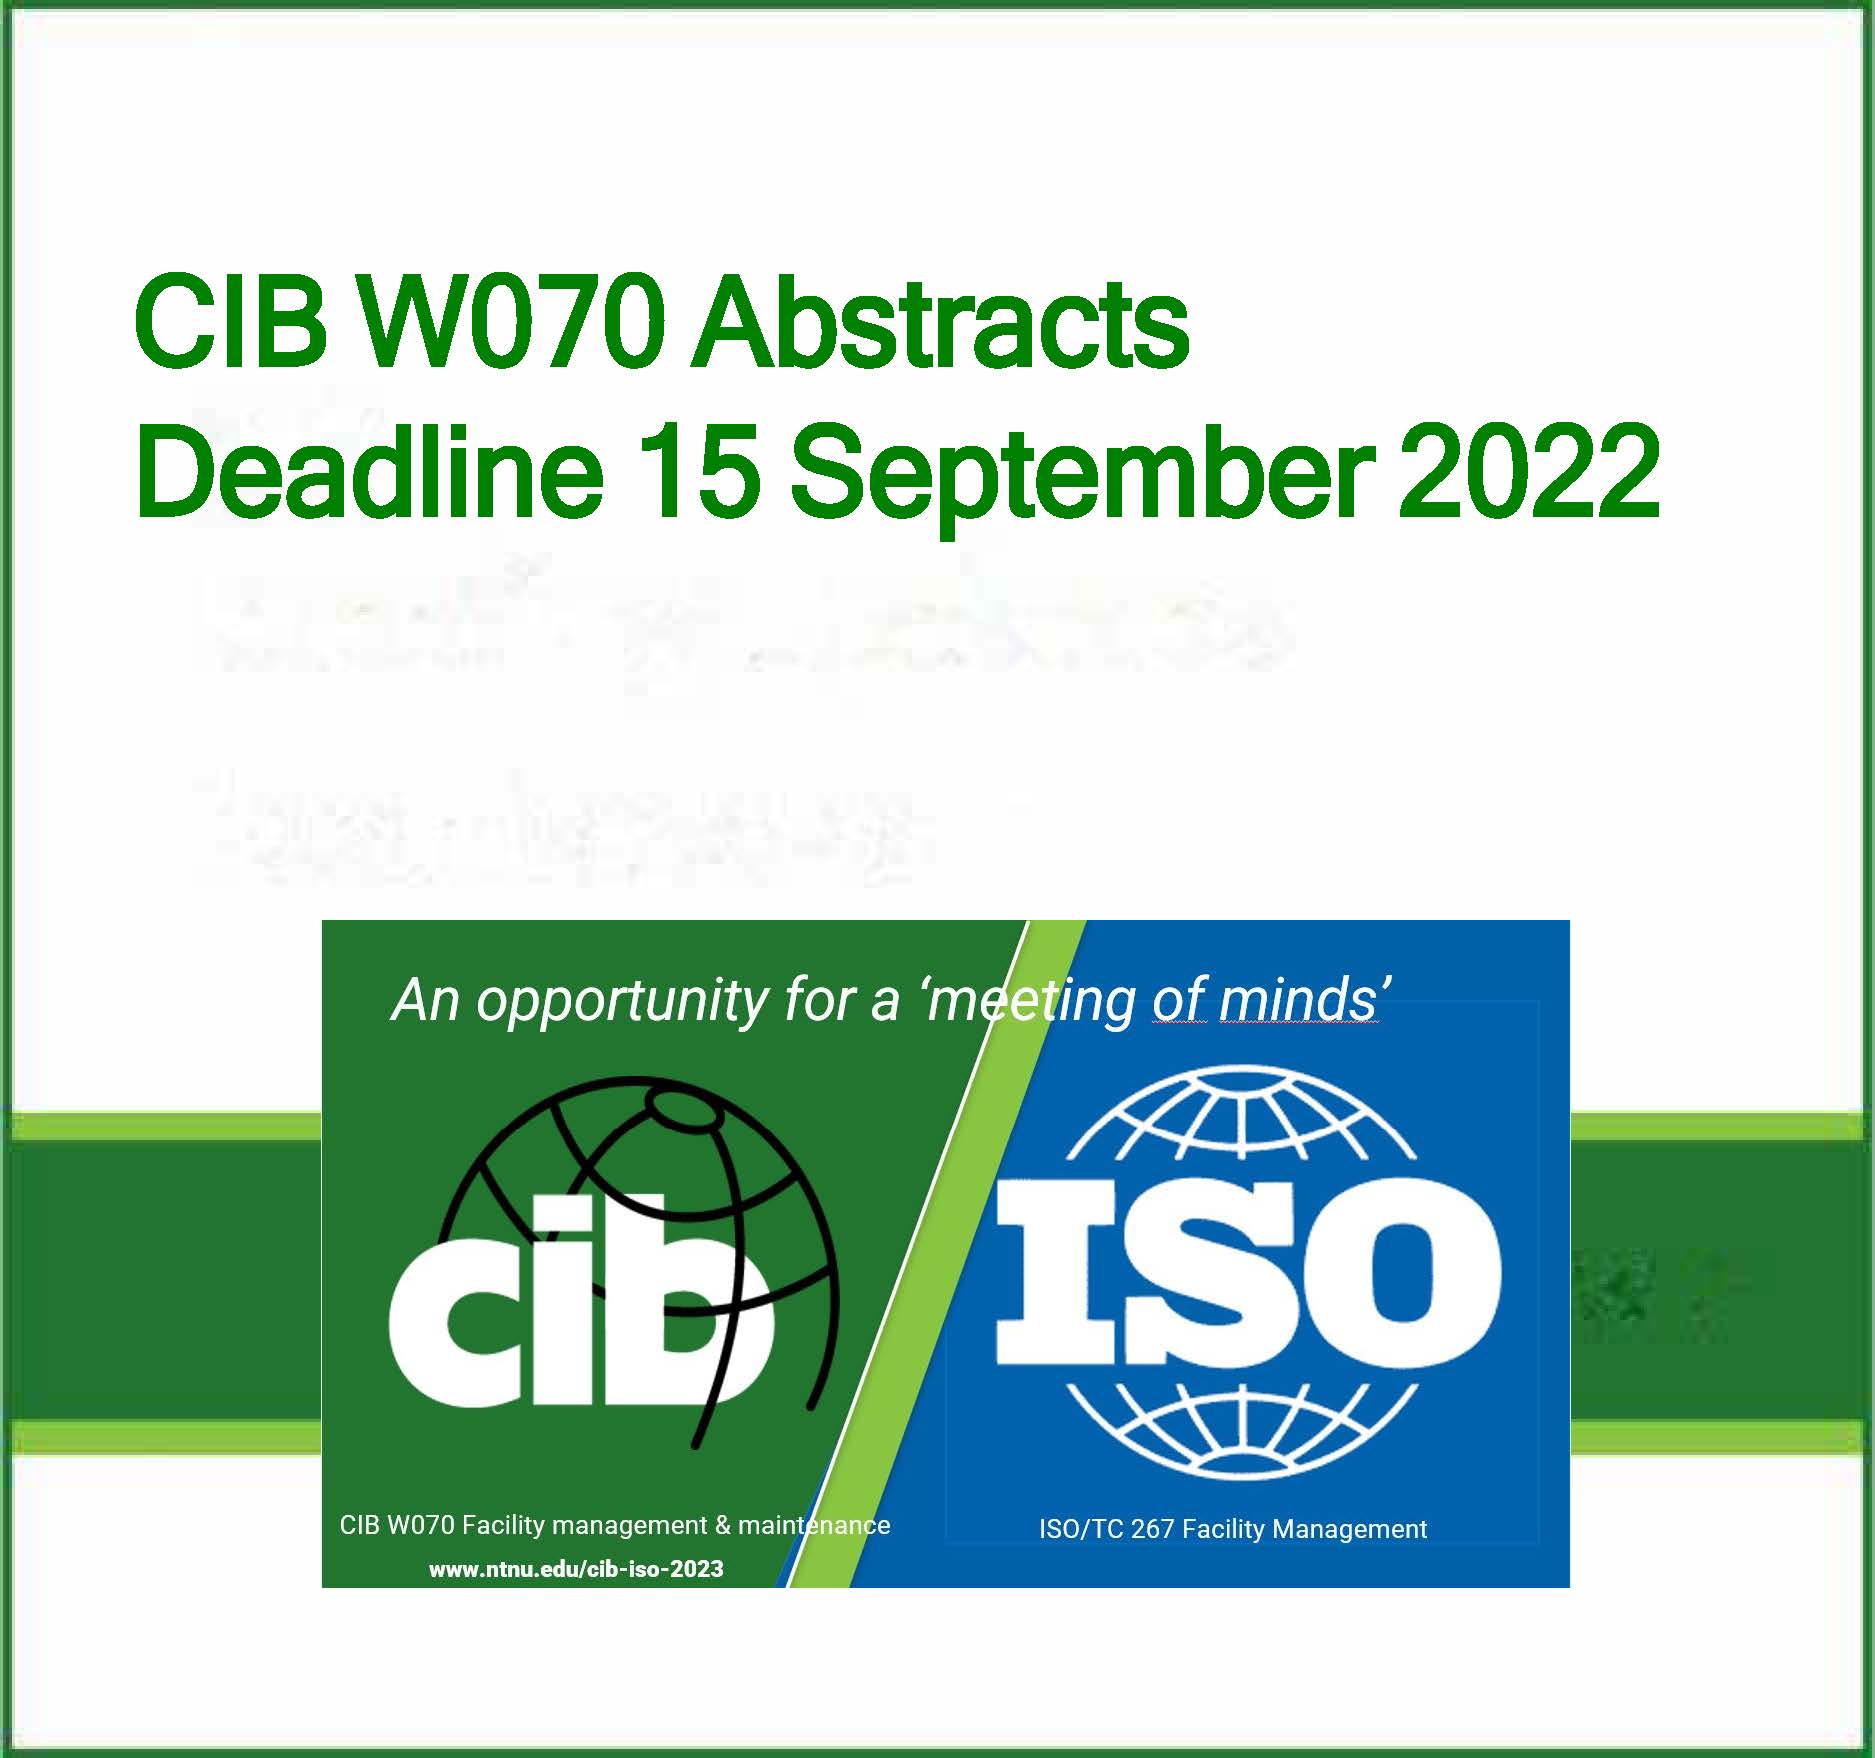 CIB W070 Conference on Facility Management and Maintenance 2023